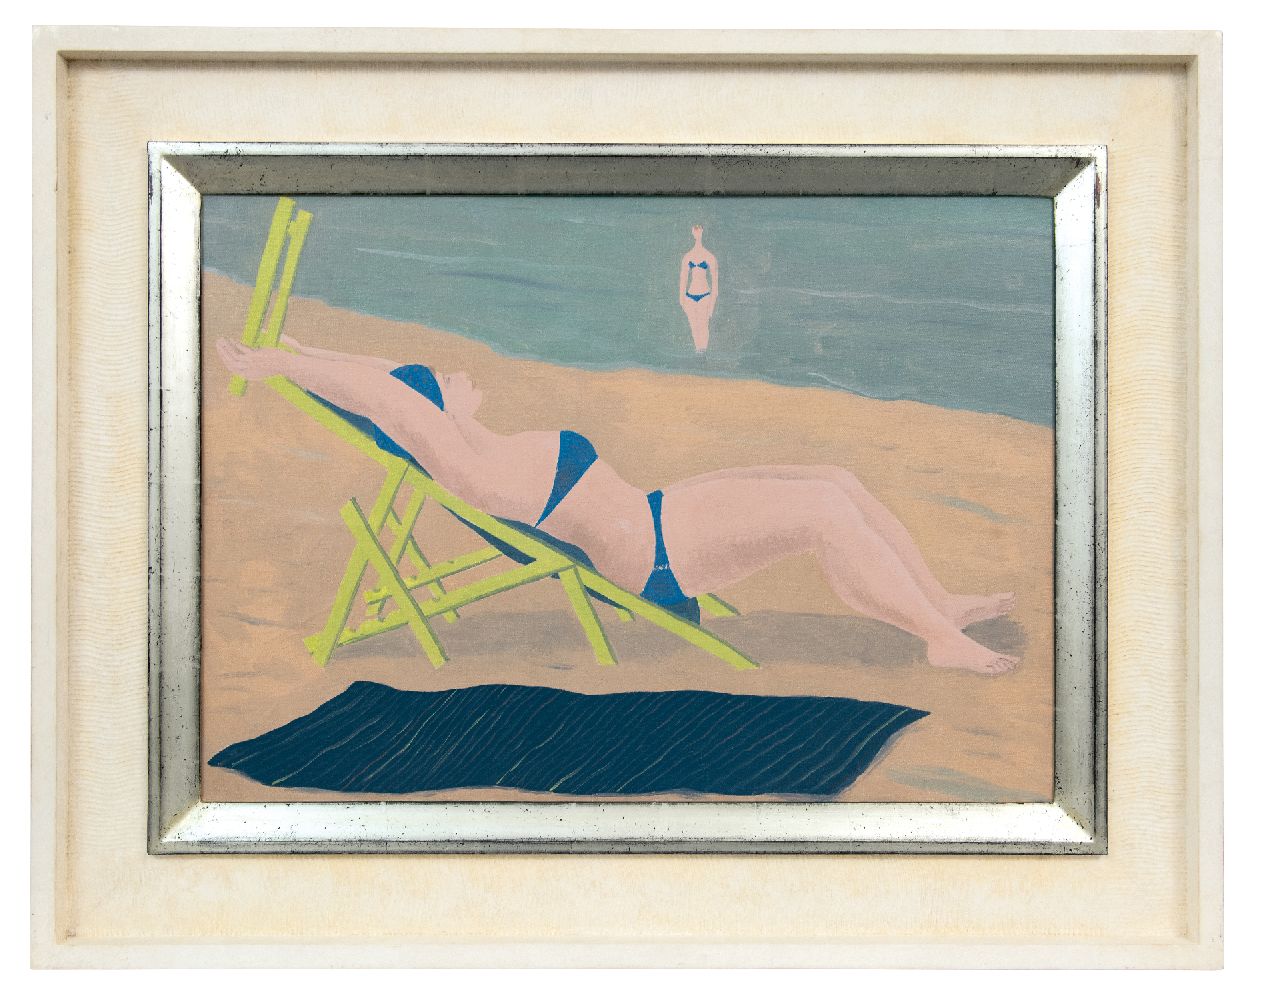 Erfmann F.G.  | 'Ferdinand' George Erfmann | Paintings offered for sale | Sunbather, oil on canvas 50.0 x 70.4 cm, signed l.l. with monogram and dated 1958